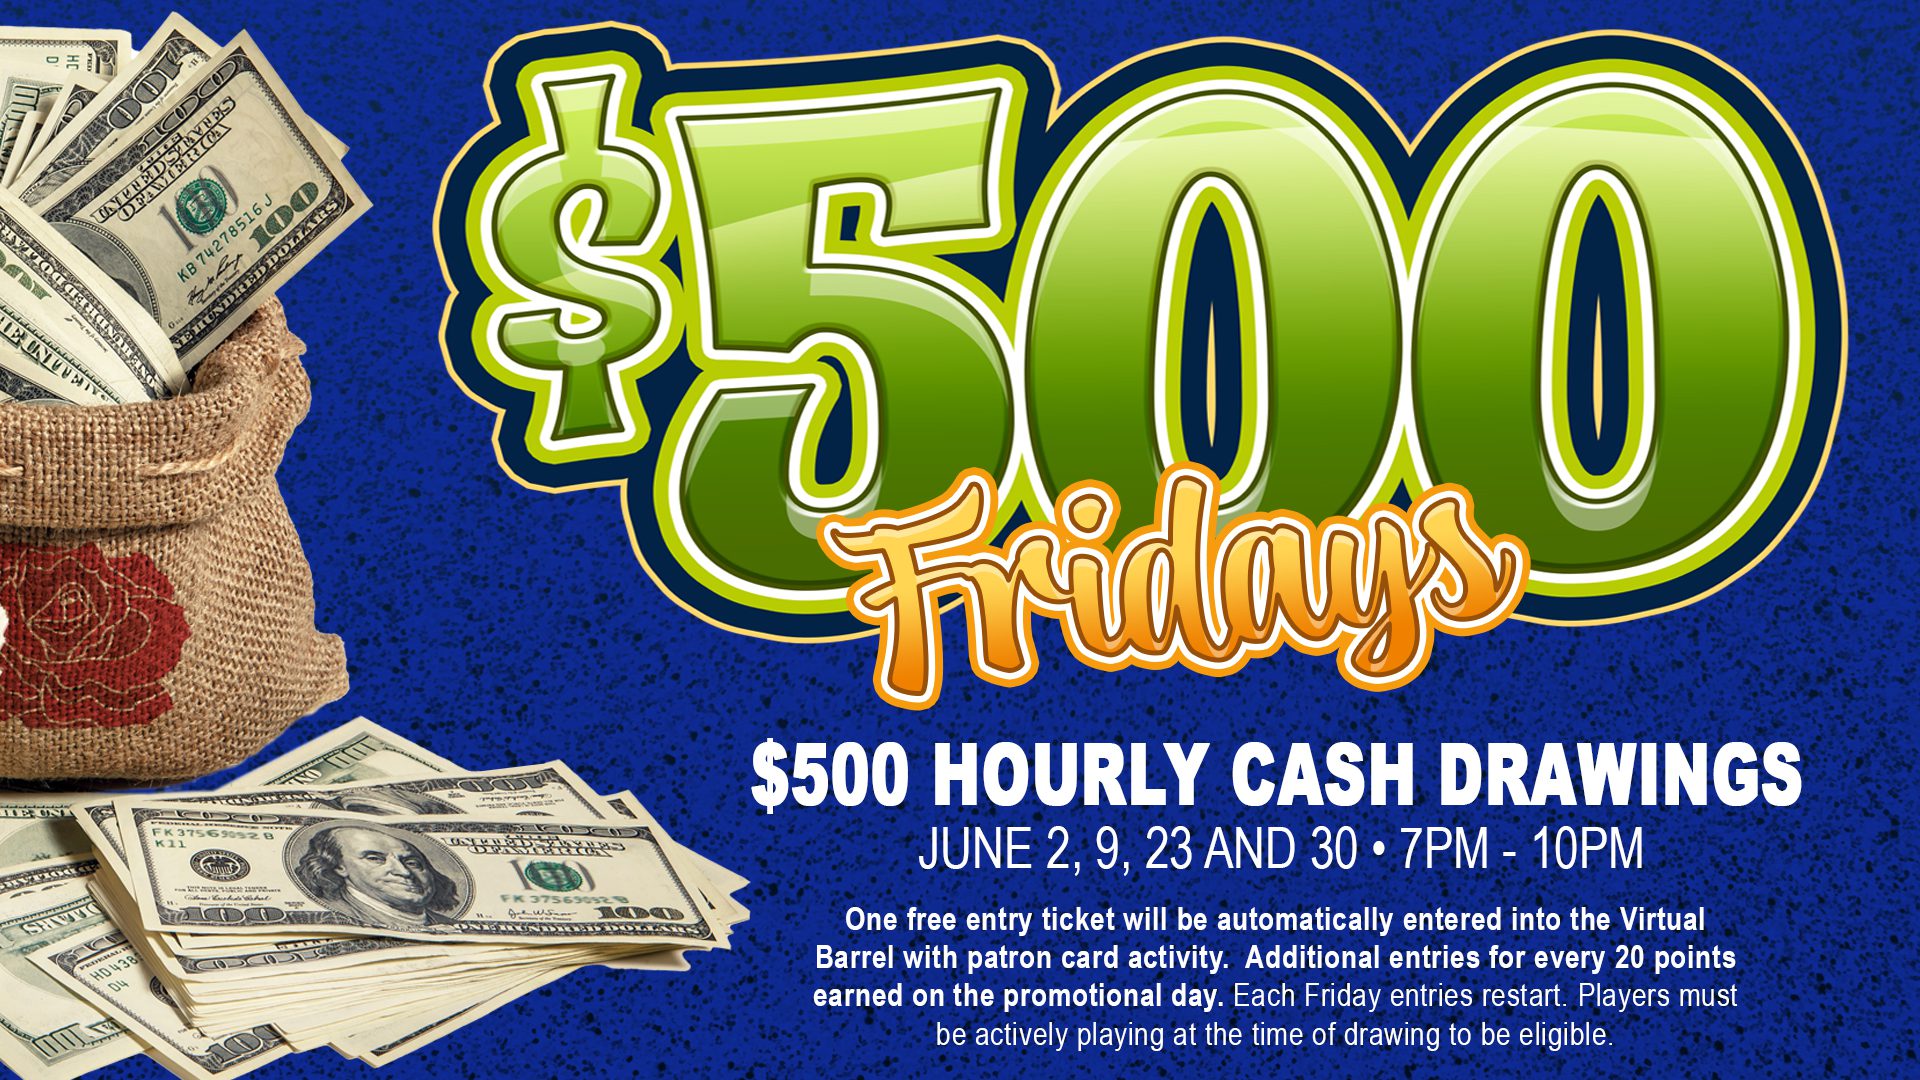 A $ 5 0 0 friday 's cash draw is being held on the same day as the grand opening of the new casino.